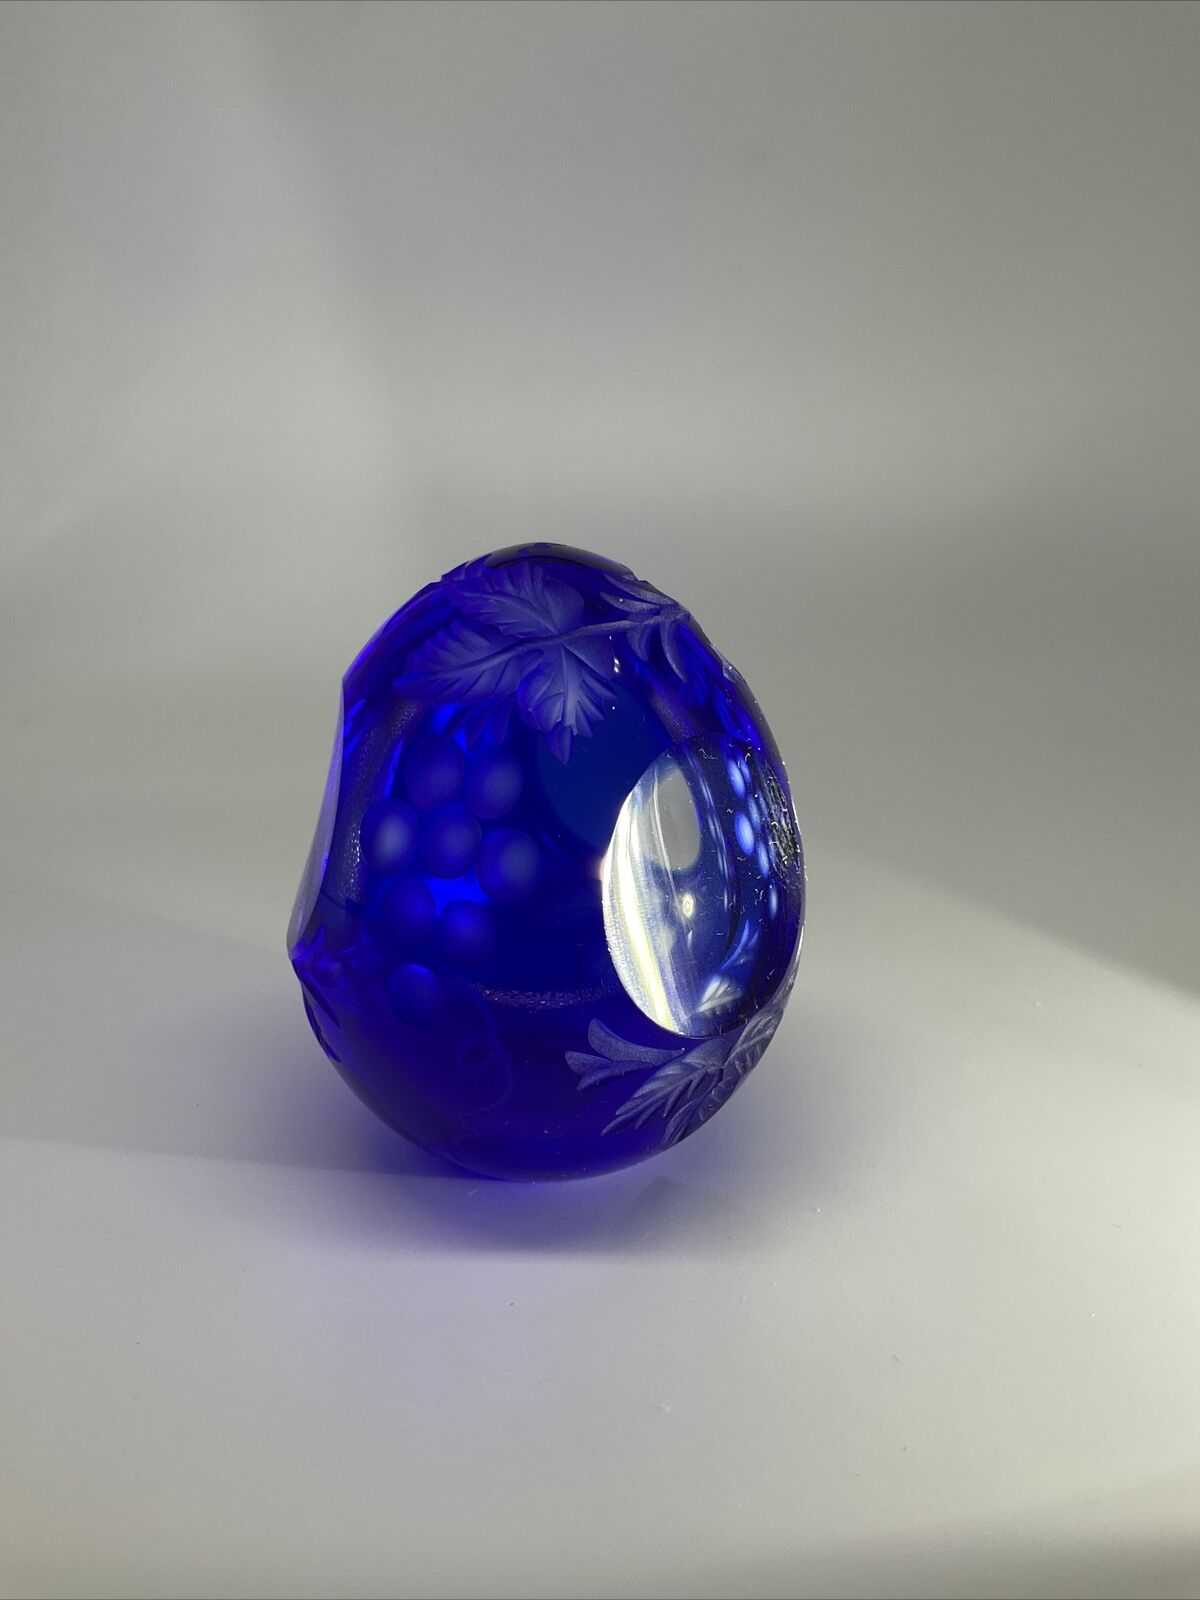 Very Rare Gorgeous Russia Cobalt Blue Etched St Petersburg Egg.